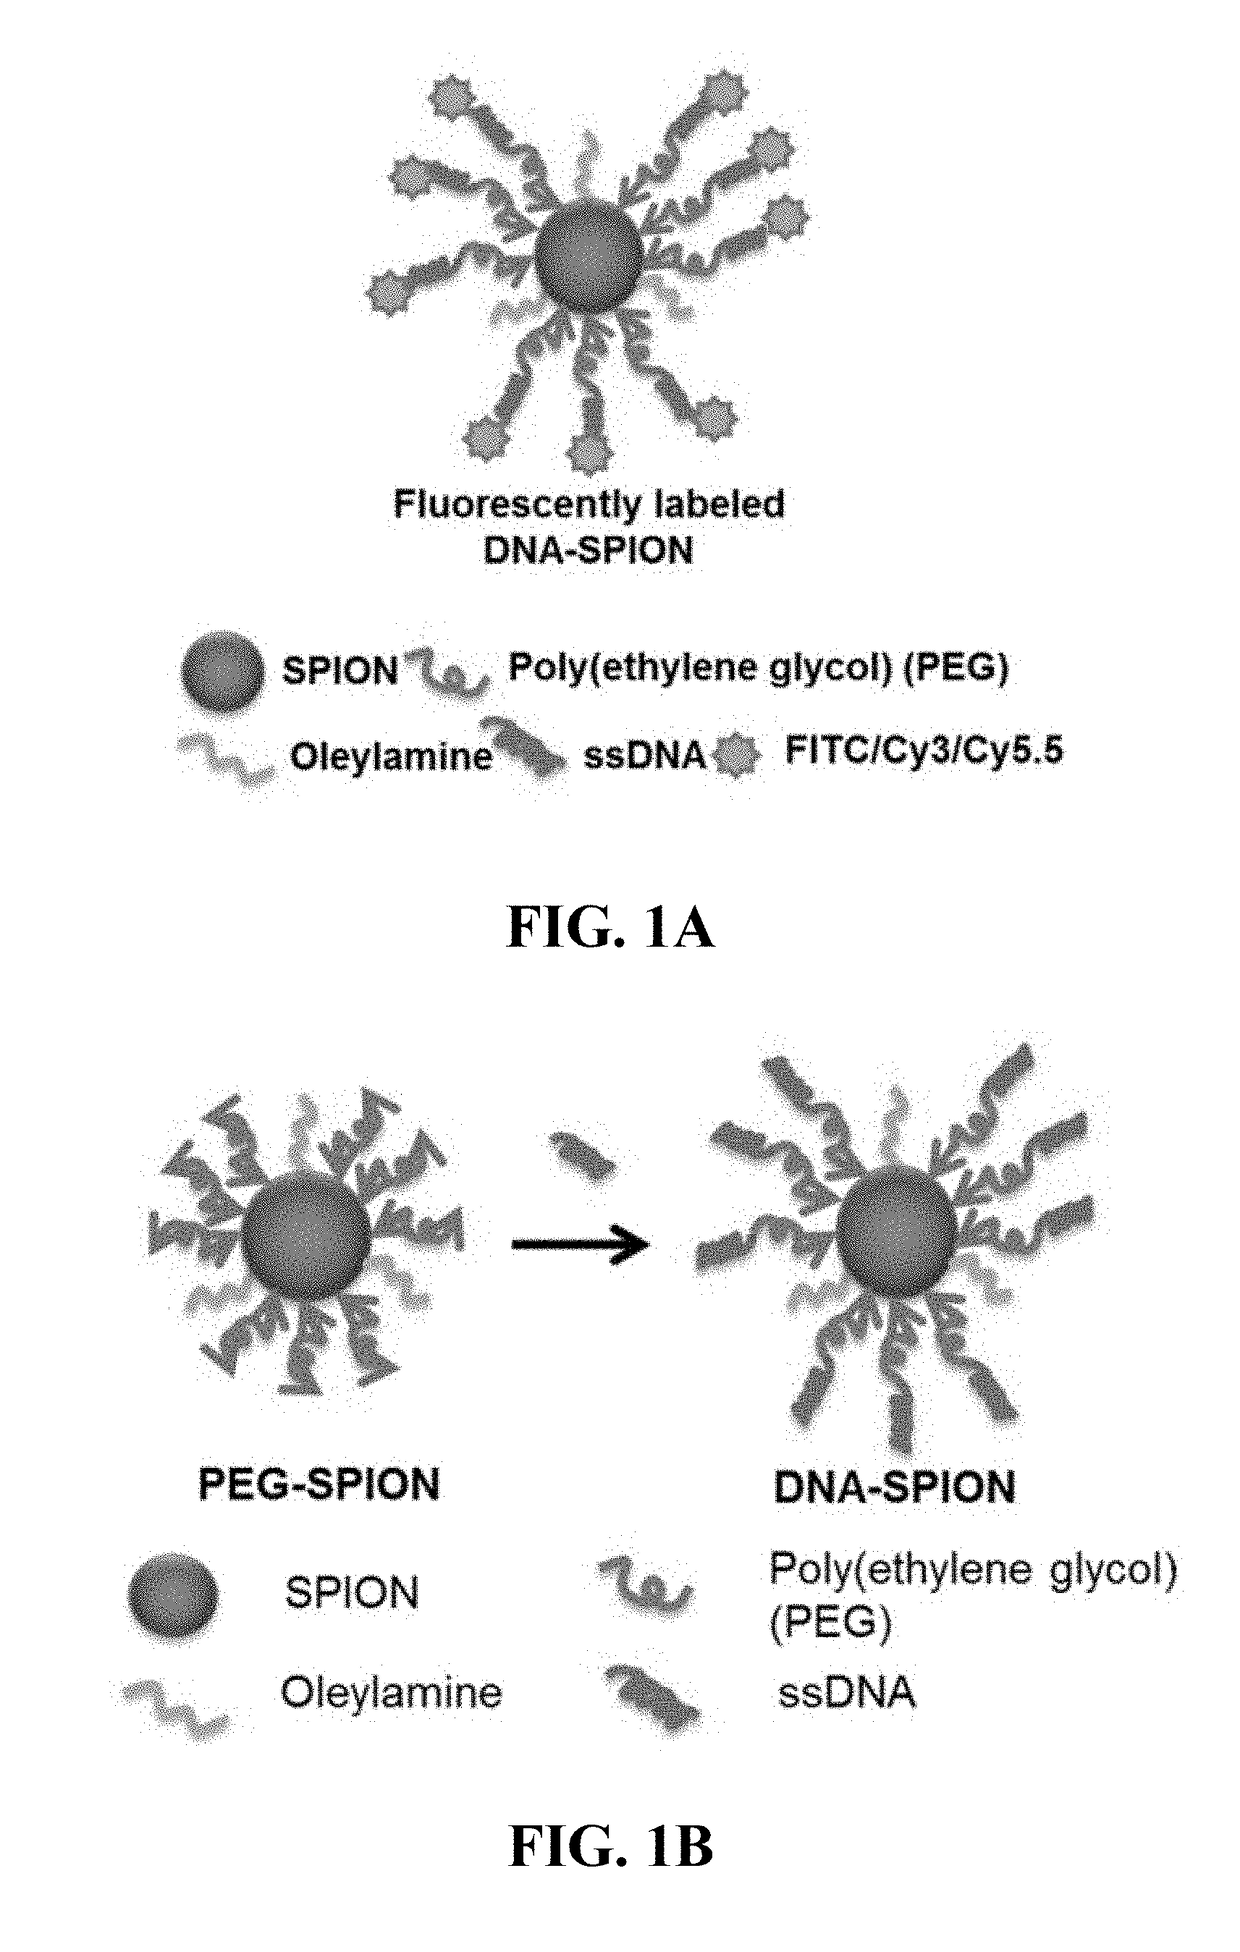 Materials and methods for effective in vivo delivery of DNA nanostructures to atherosclerotic plaques